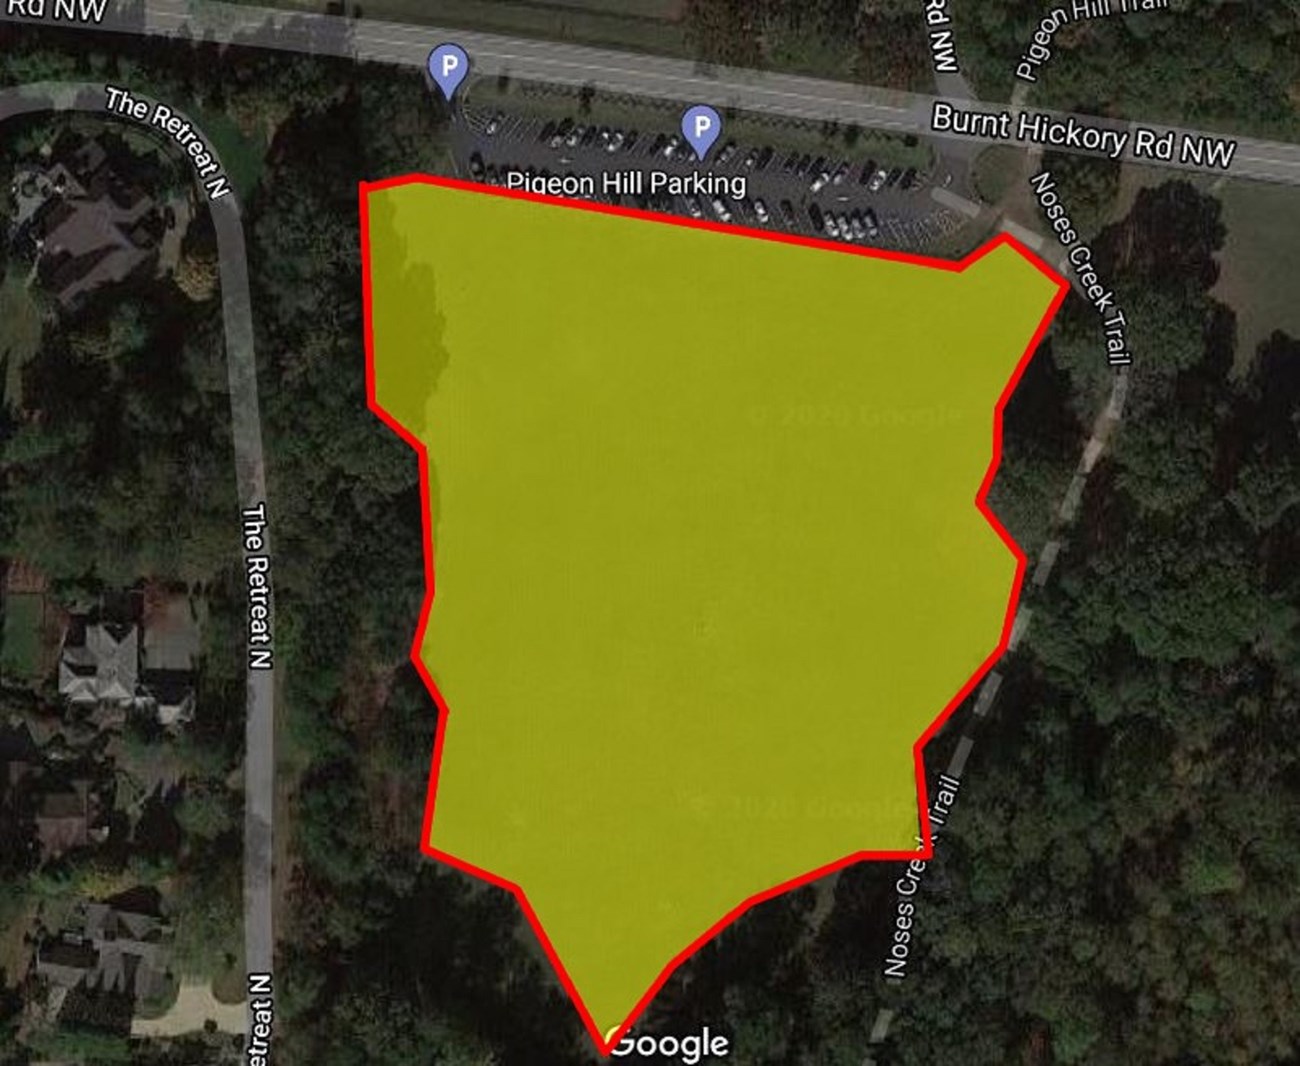 Yellow highlights field area surrounded on 3 sides by trees. The top side is labeled Pigeon Hill Parking then a parallel road named Burnt Hickory Rd NW.